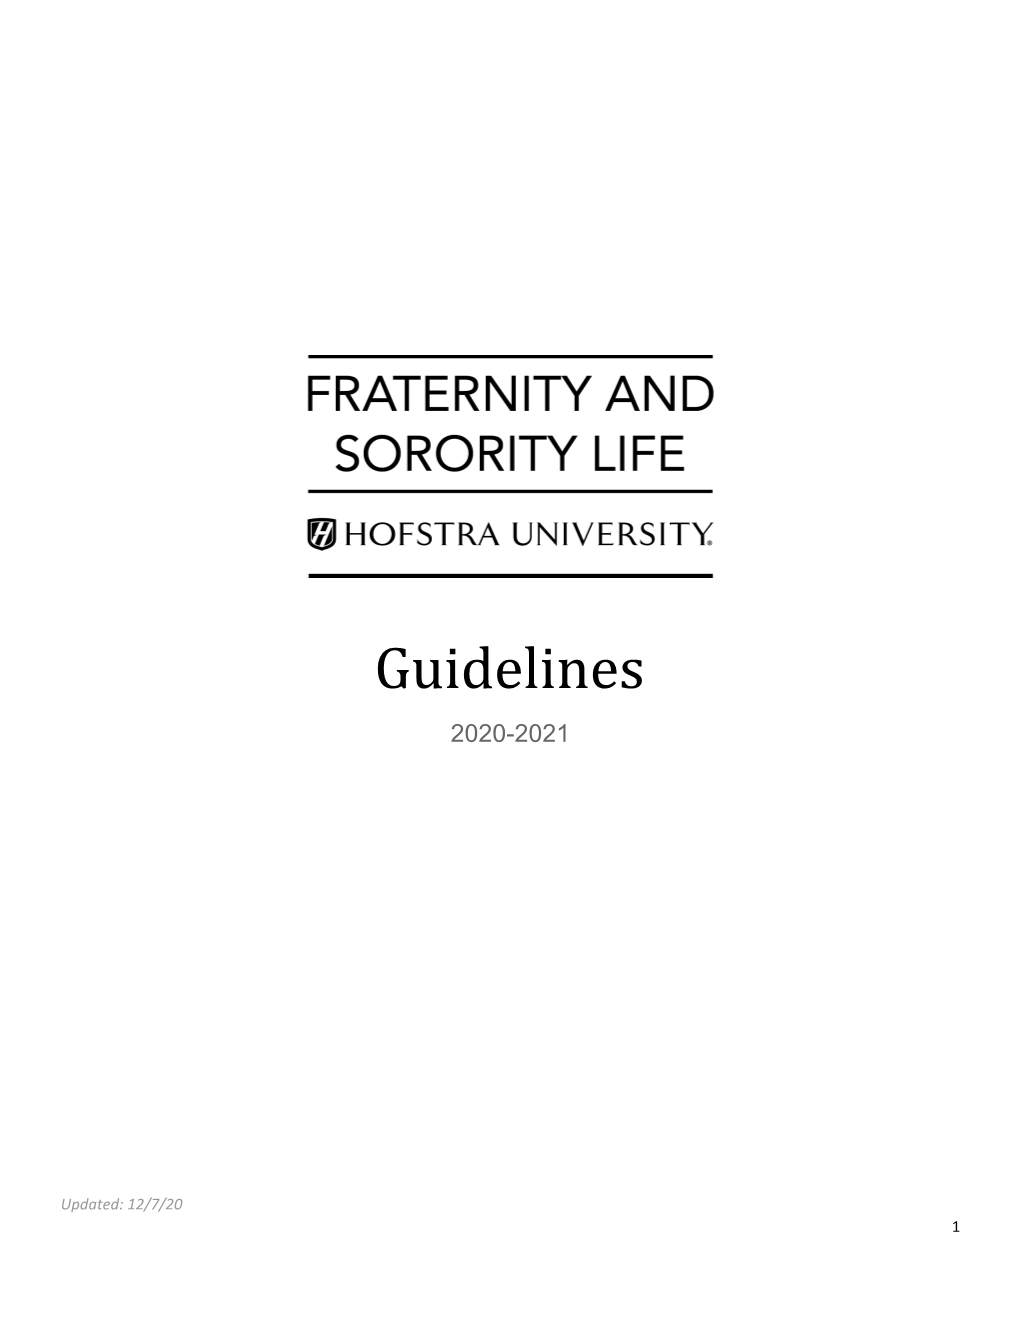 Fraternity and Sorority Life Has Been a Significant Part of the Undergraduate Experience at Hofstra University Since Its Founding in 1935